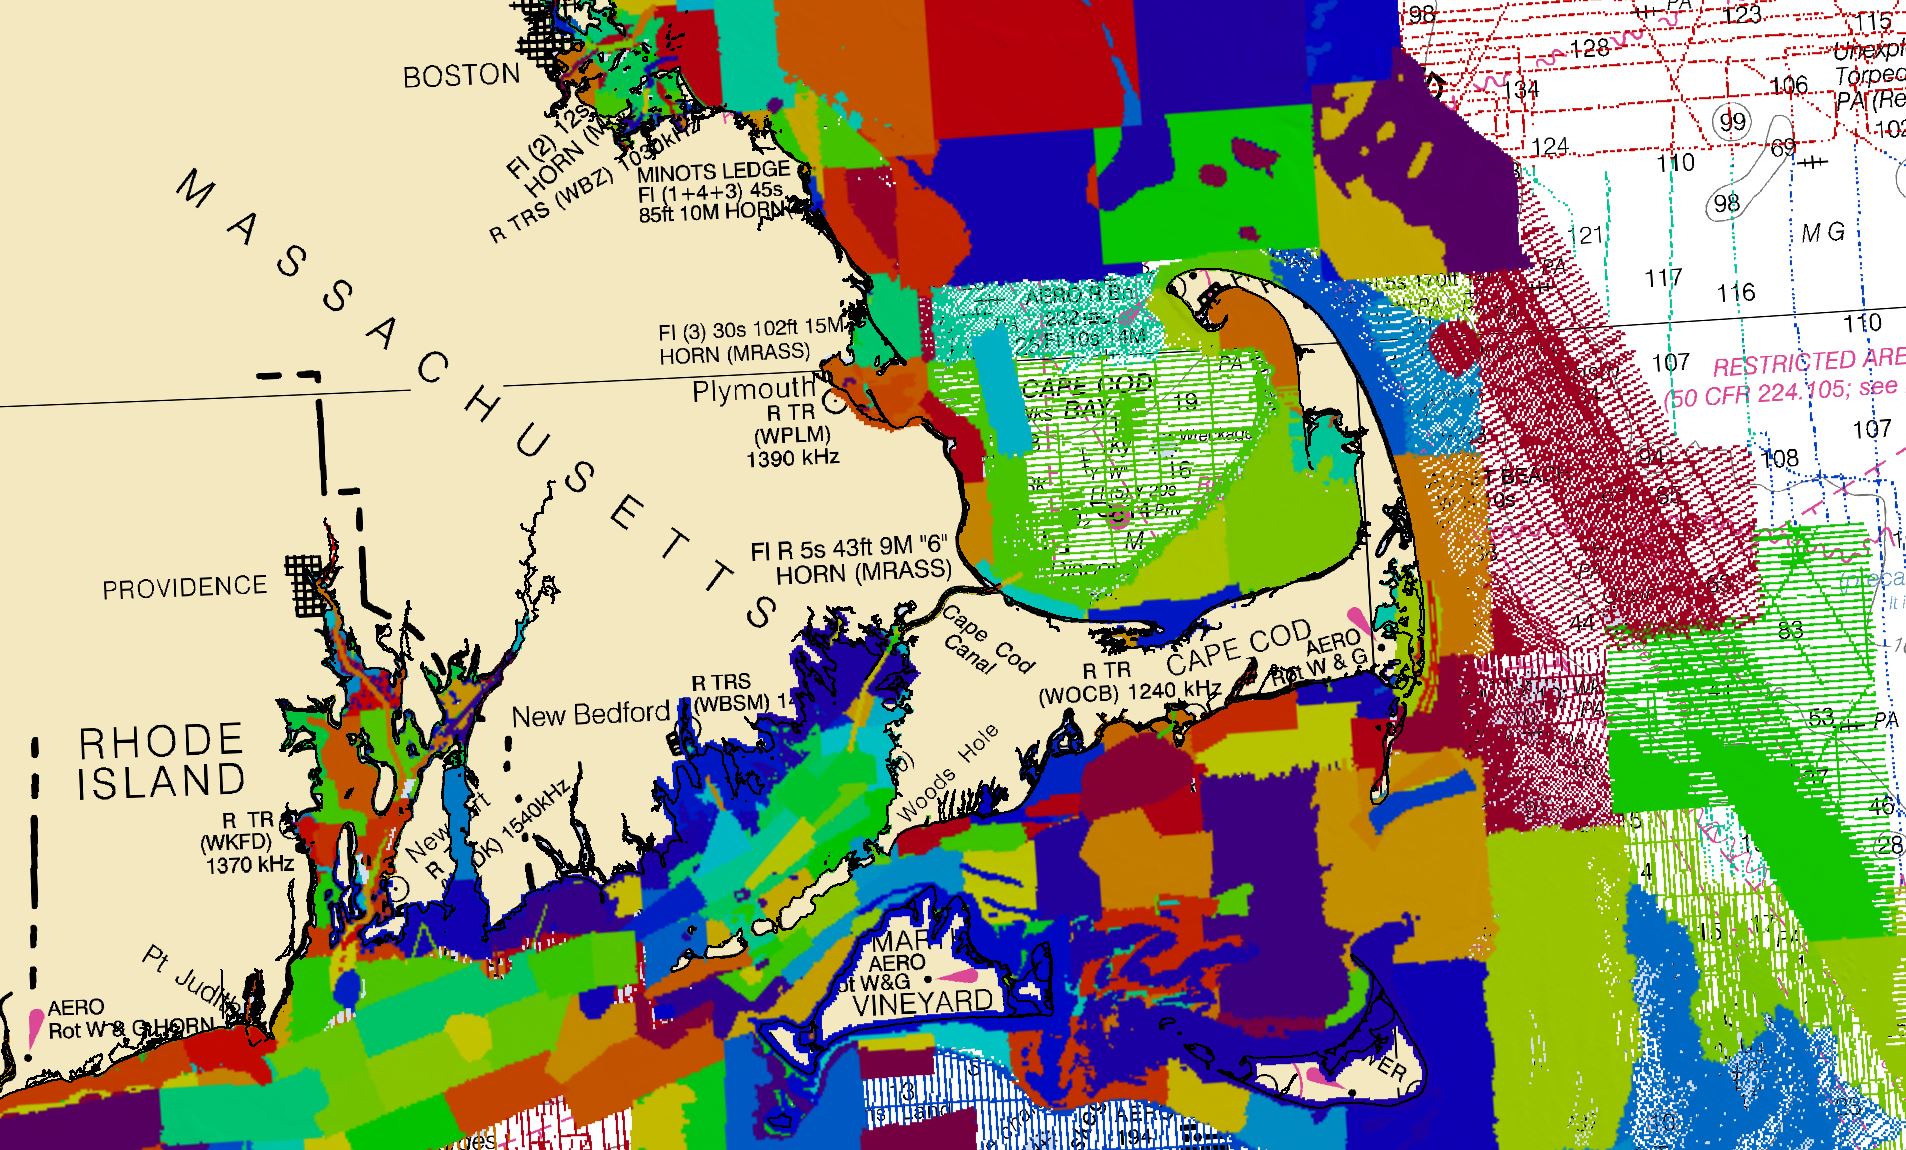 Bathymetric surveys that are included in the NBS.